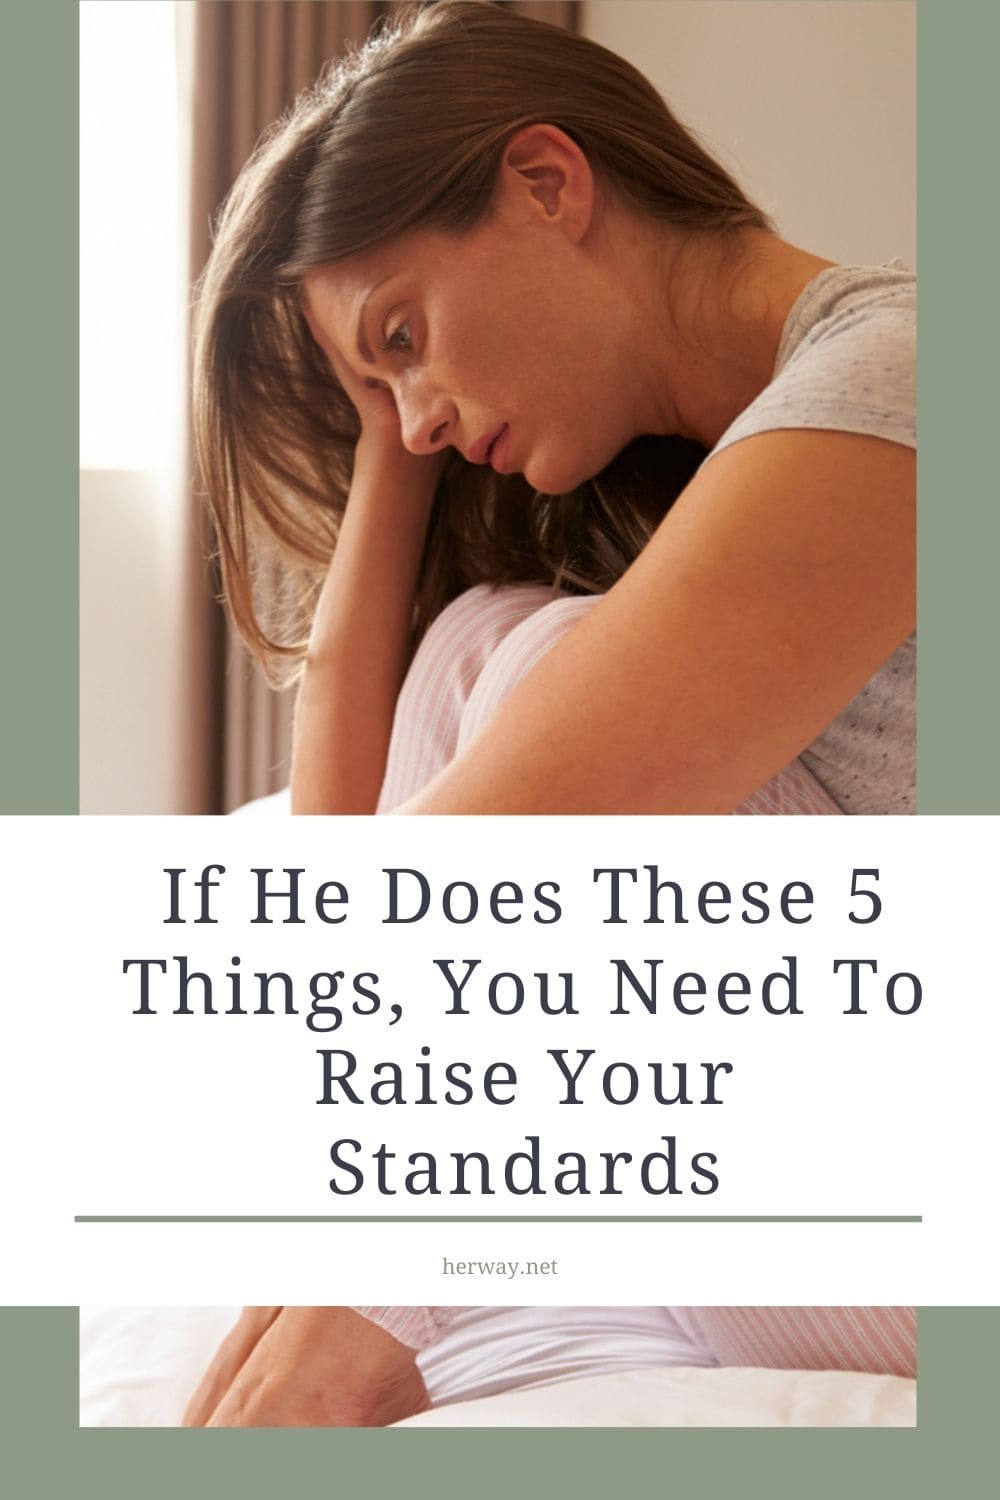 If He Does These 5 Things, You Need To Raise Your Standards